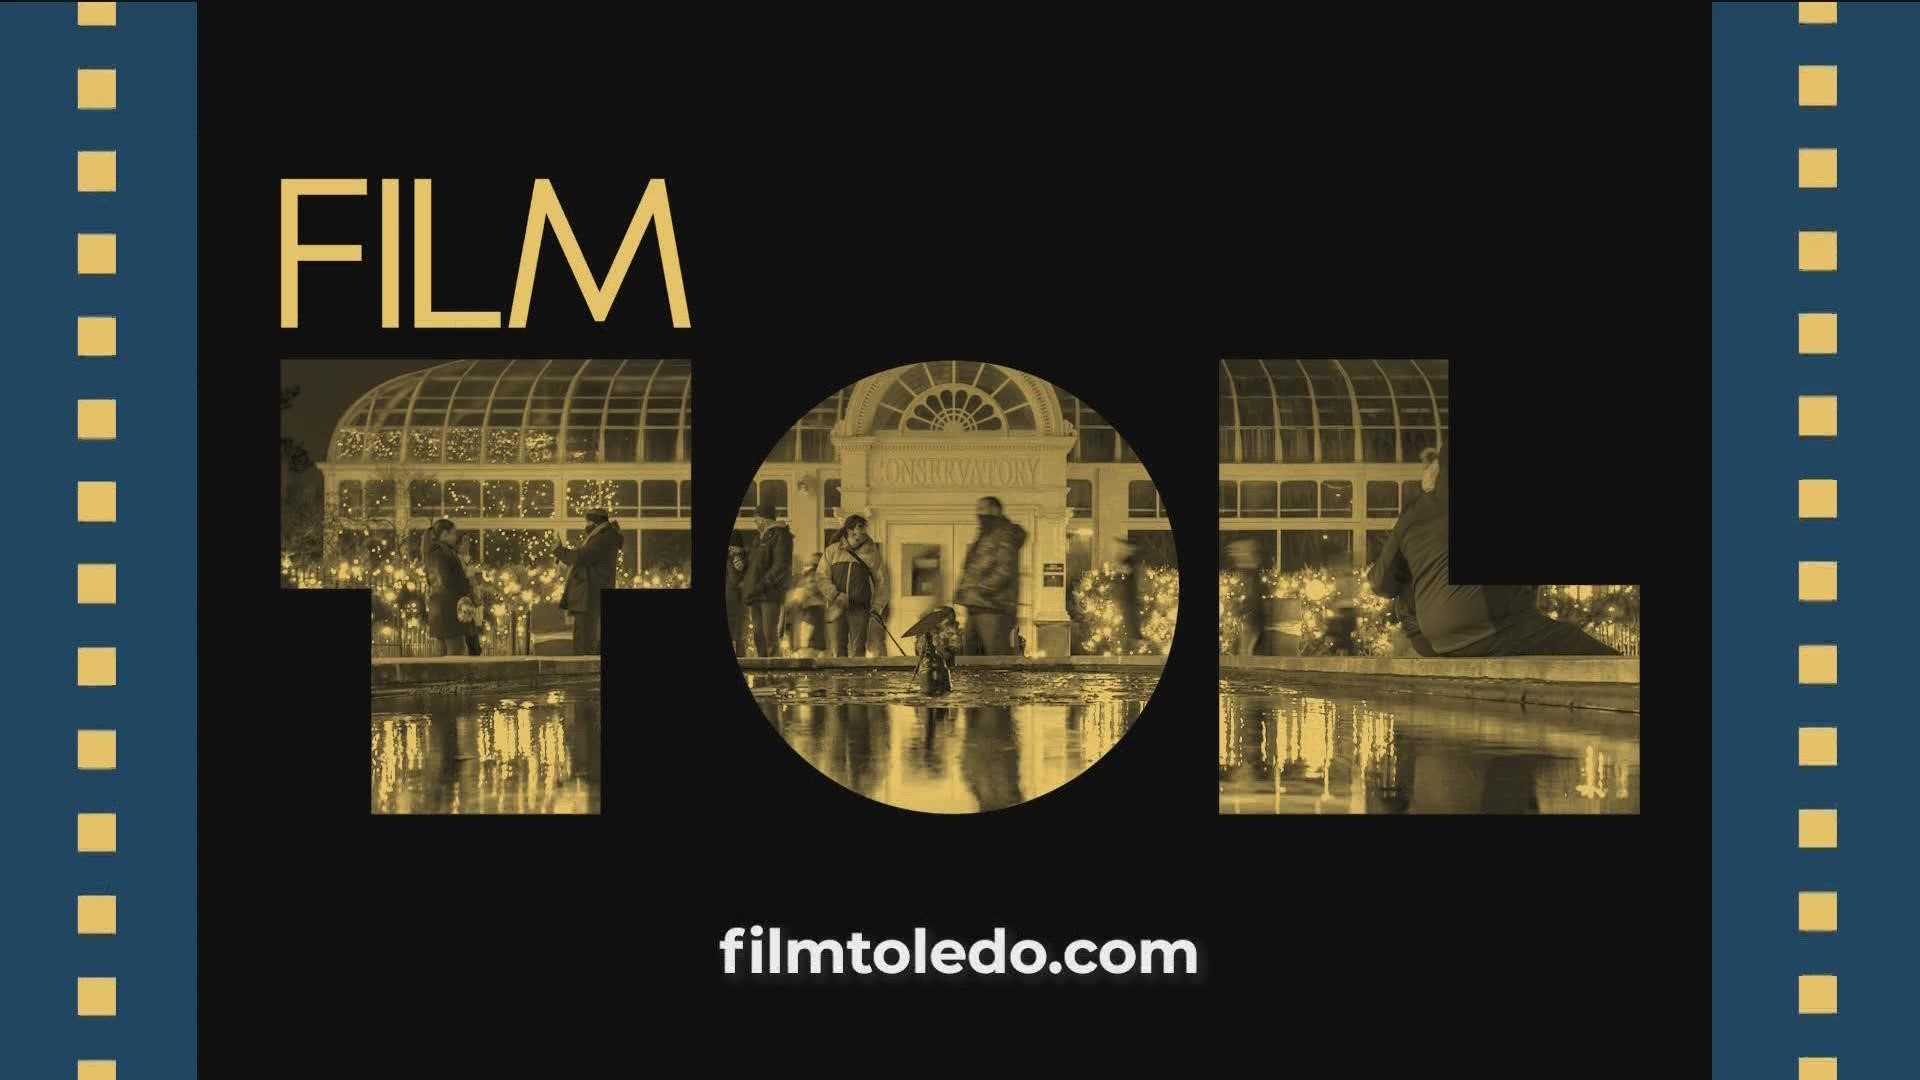 The executive director of FilmToledo says a combination of talented new artists and Ohio's strong tax breaks for filmmakers are pushing the medium locally.